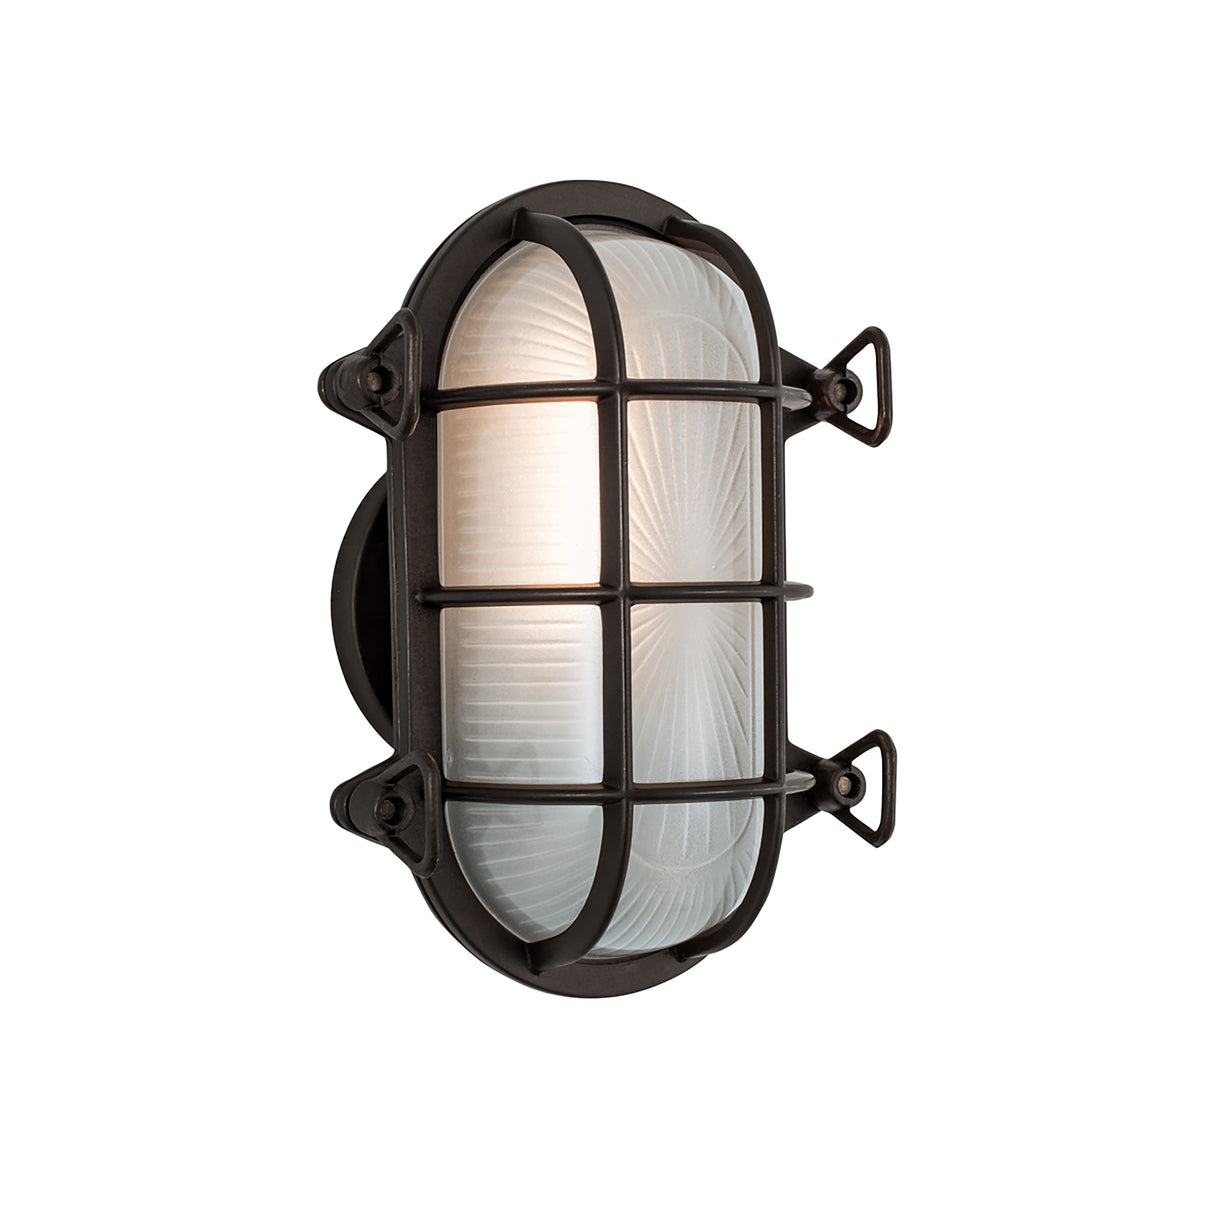 Elk 1101-BR-FR Mariner Oblong Outdoor Wall Light - Bronze With Frosted Glass